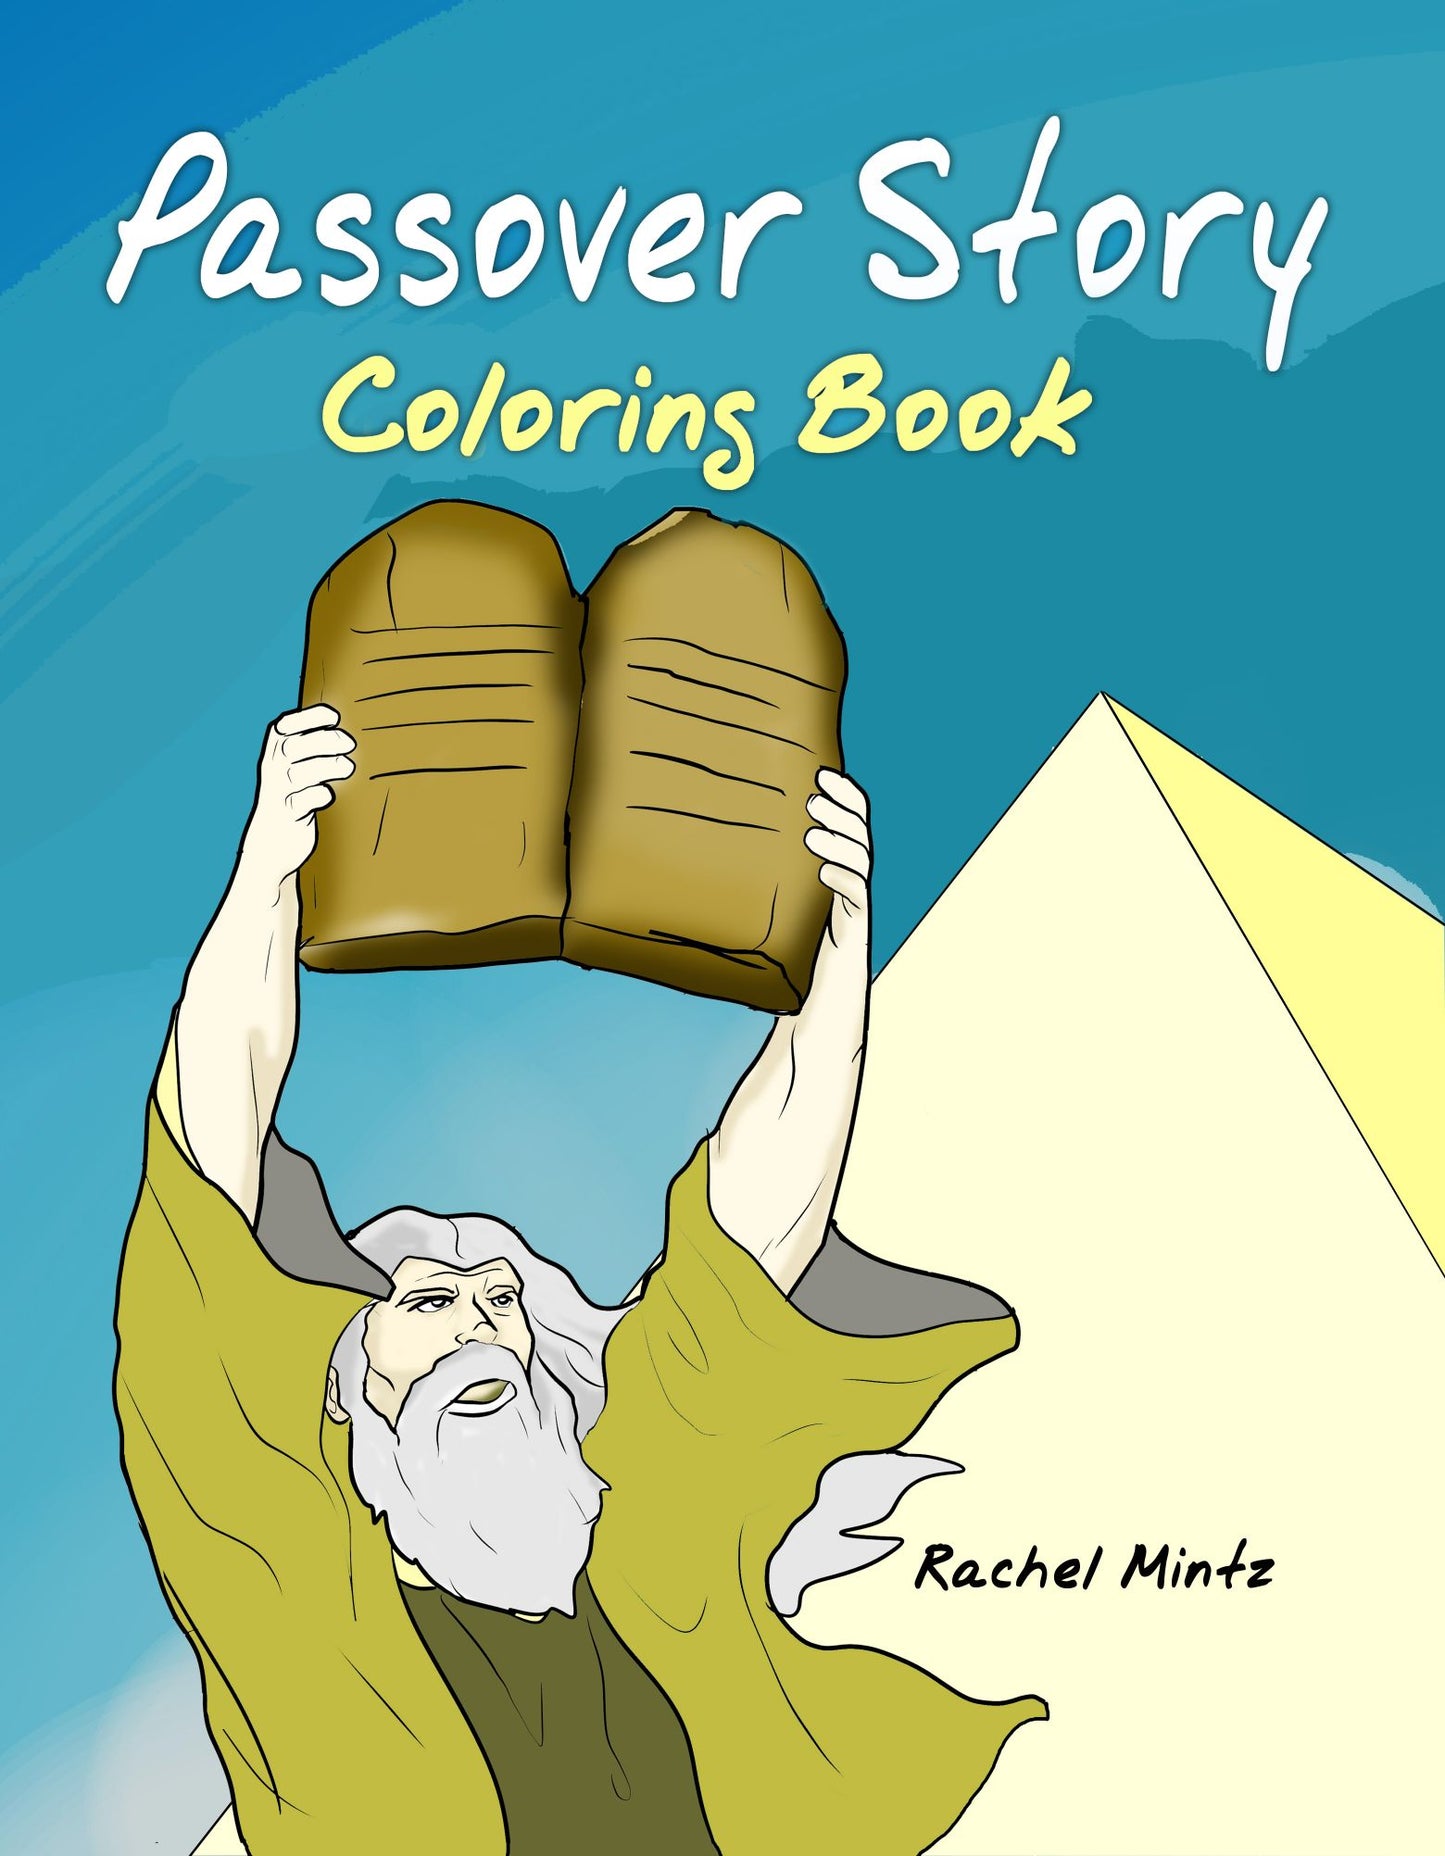 Passover Story - Coloring Book (Pesach Story Coloring) PDF Book